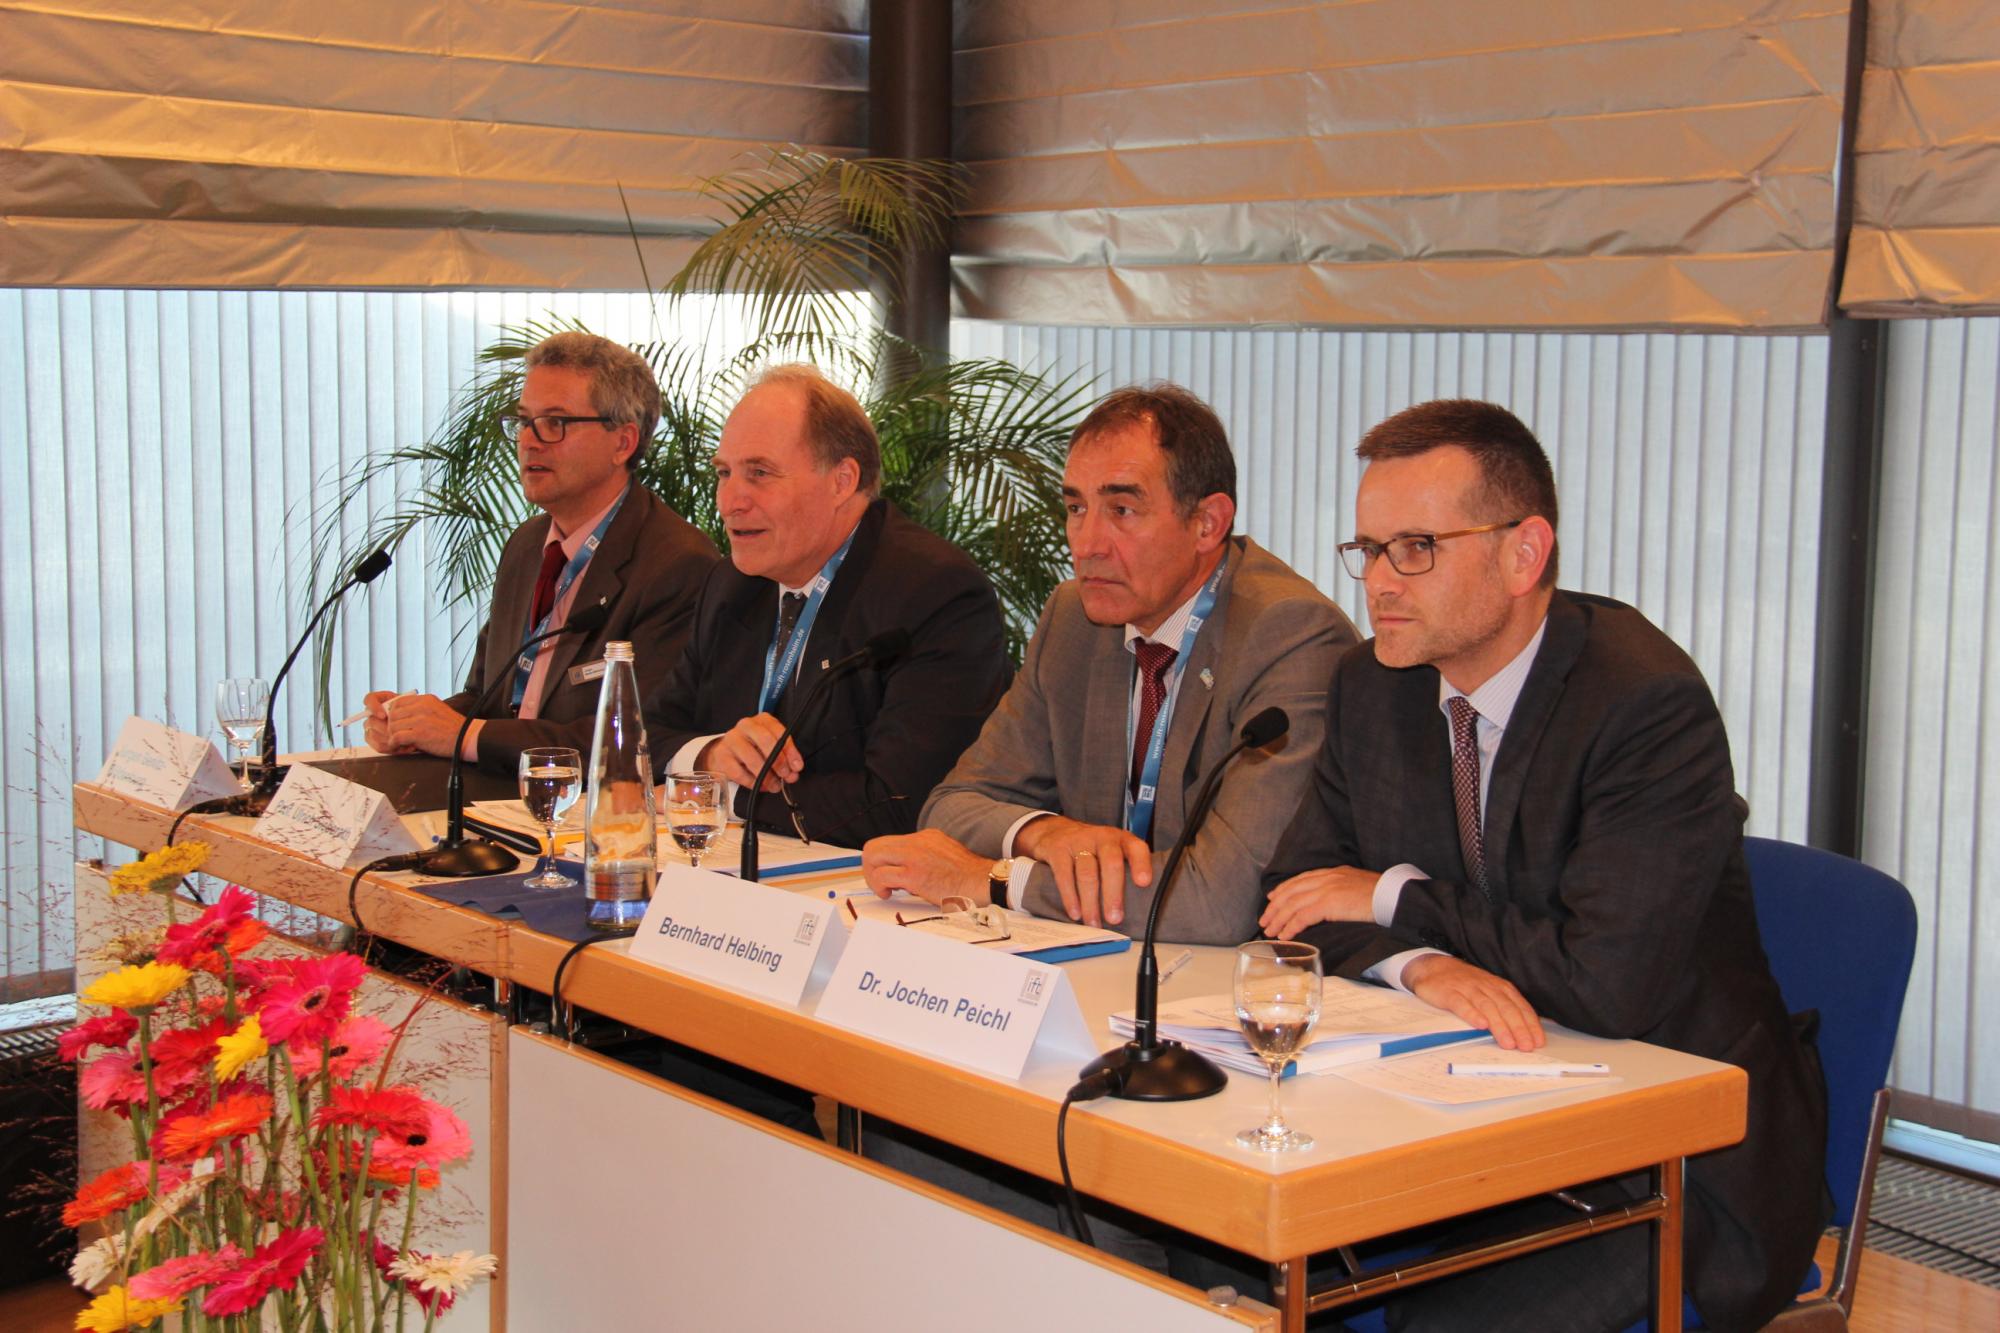      The Chairman and the Institute Management reporting to 35 domestic and foreign journalists about the activities of ift Rosenheim and current industry trends. (from left to right: Jürgen Benitz-Wildenburg, Prof. Ulrich Sieberath, Bernhard Helbing, Dr. Jochen Peichl) (Source: ift Rosenheim) 